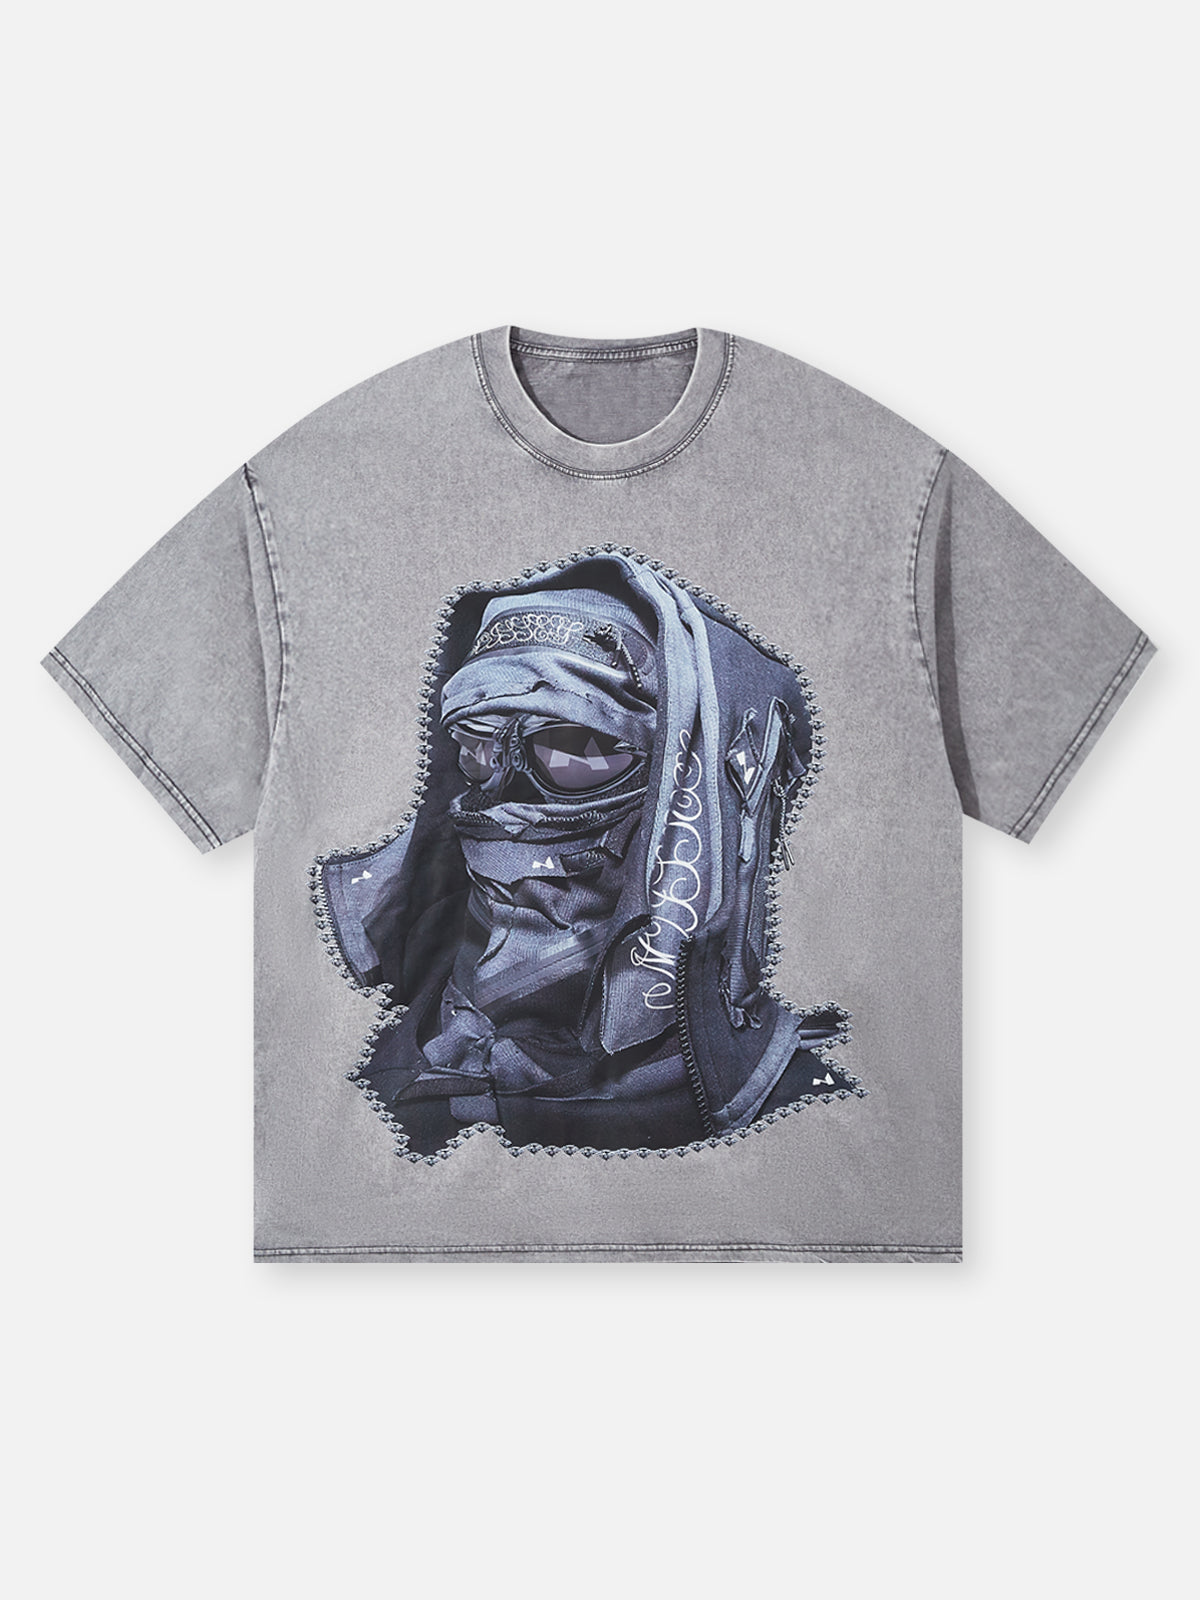 BOUNCE BACK© Gray Rock Shattered Collage Face Mask T-shirt